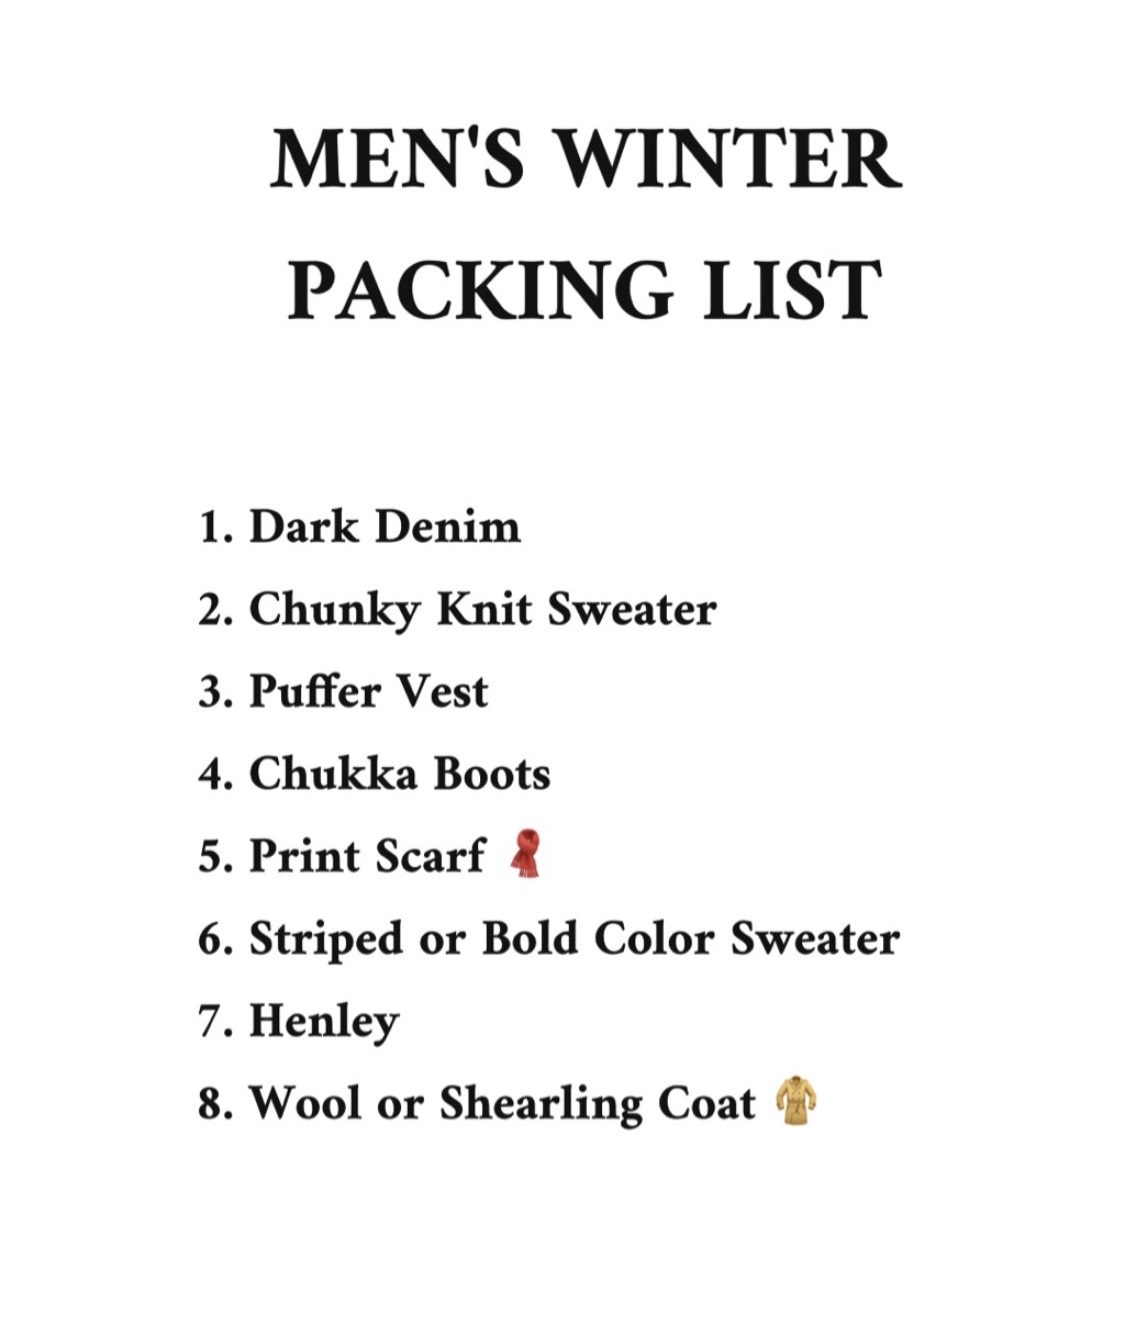 Ski Into Style…Stylish Looks for Winter Vacation Destinations, men's winter packing list